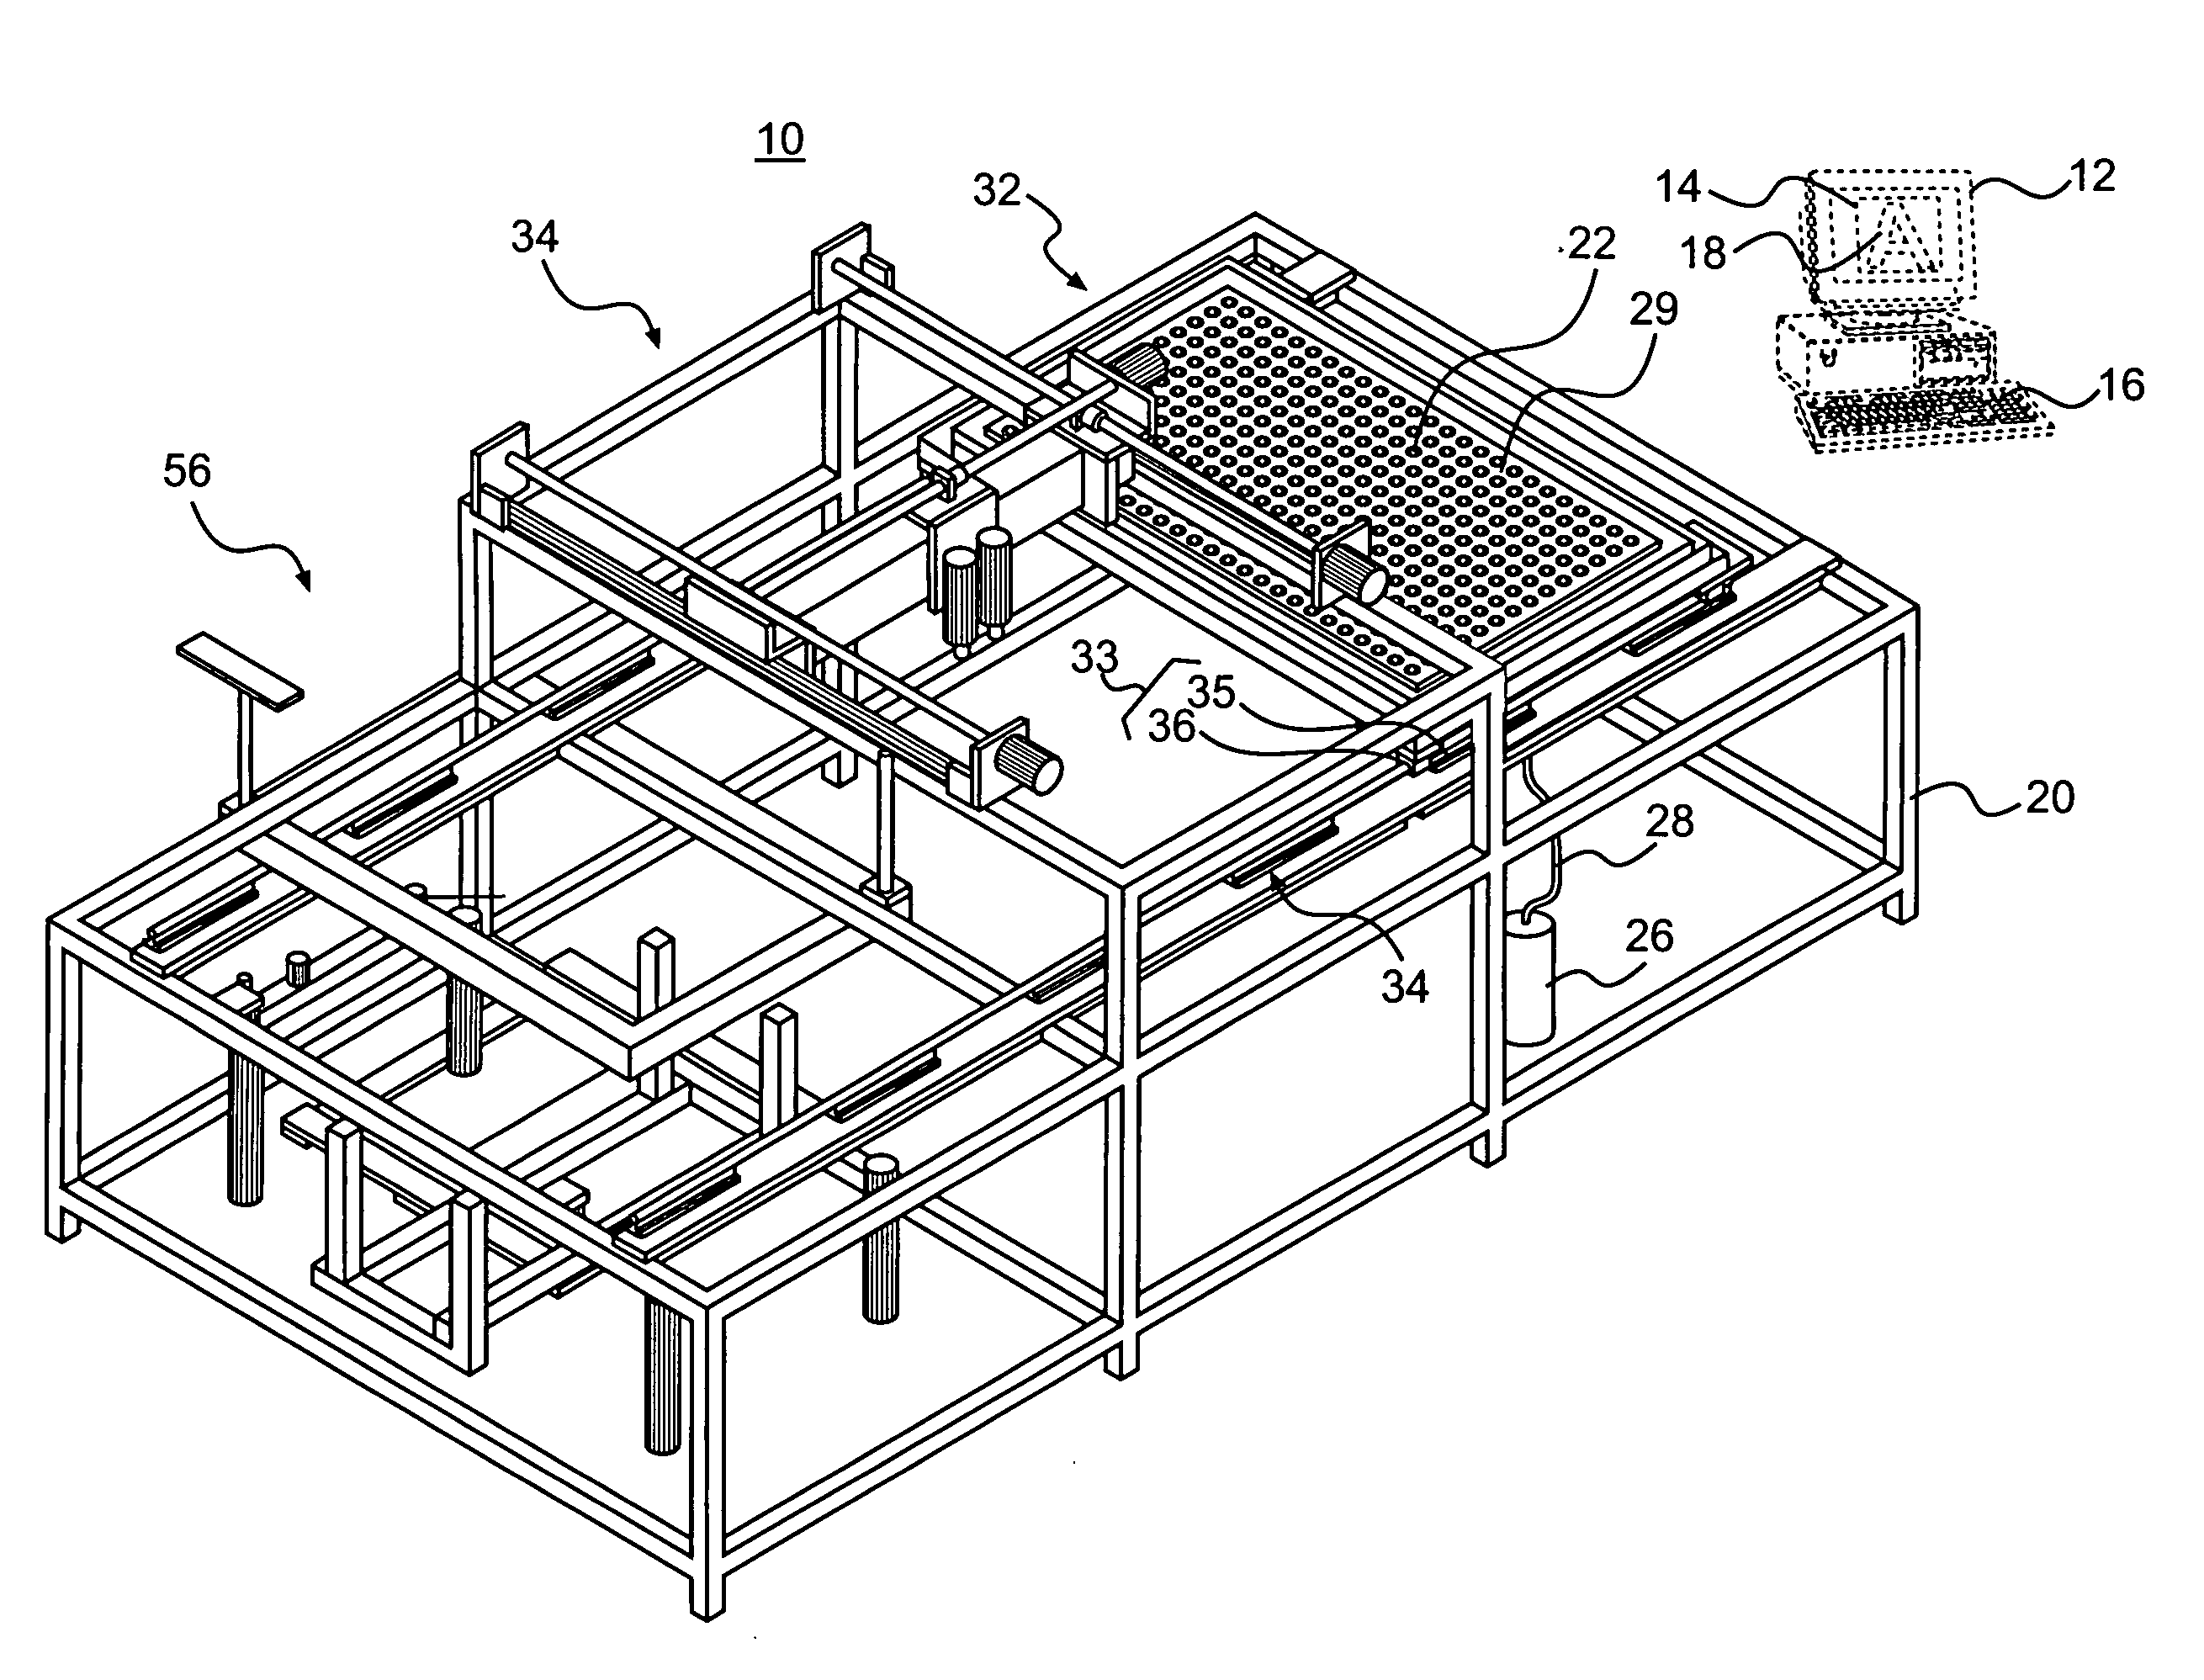 Molded object-forming apparatus and method